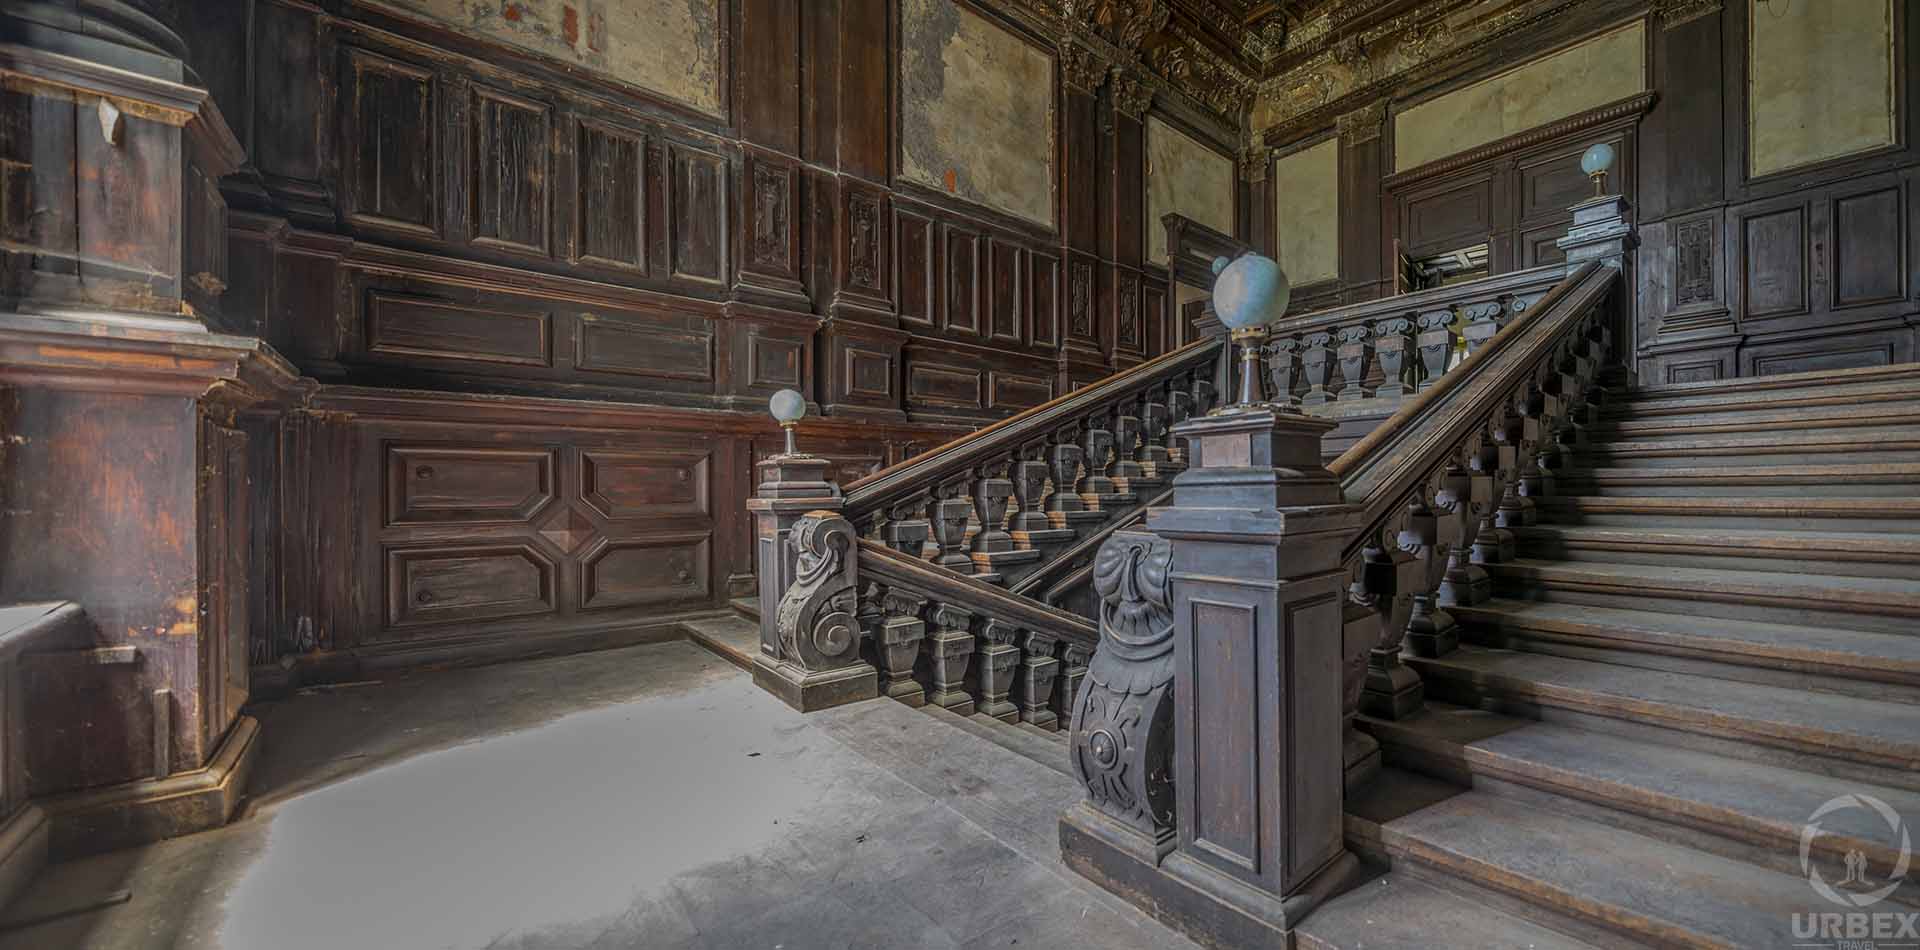 Fading Grandeur: A Glimpse into the Abandoned Palace of Bożków